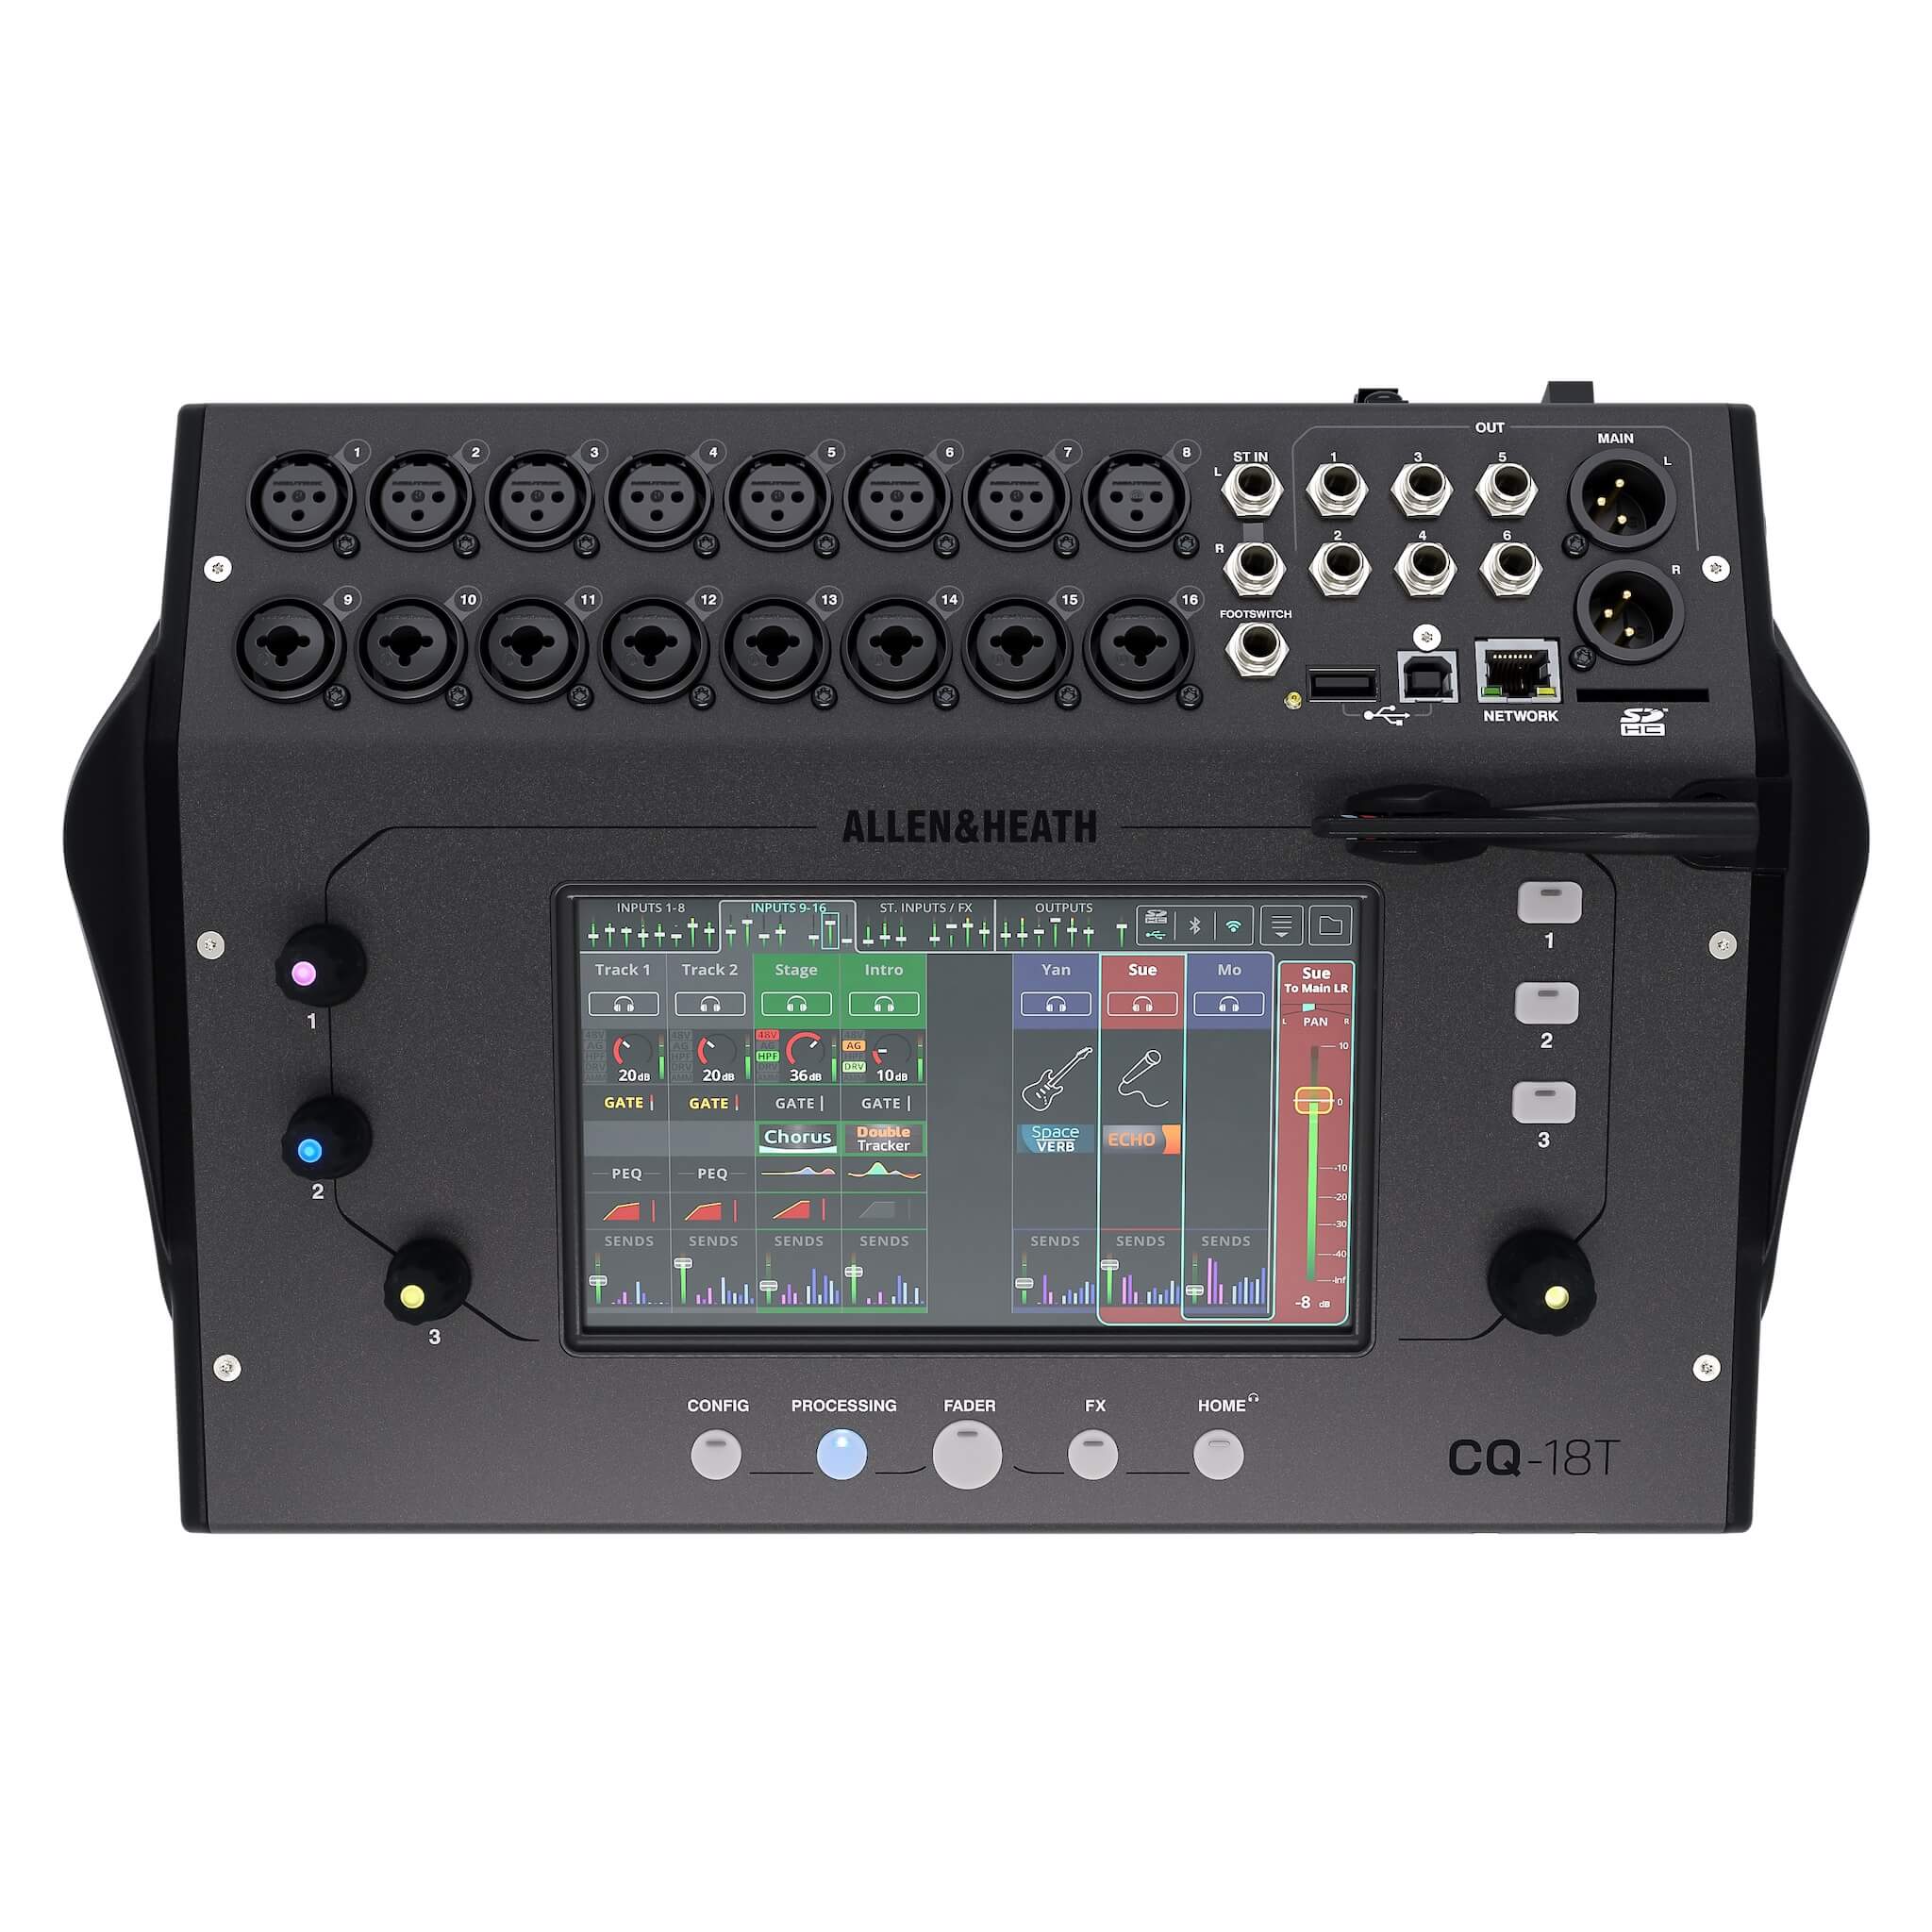 Allen & Heath CQ-18T - Compact 16-Channel Digital Mixer with Wi-Fi, top